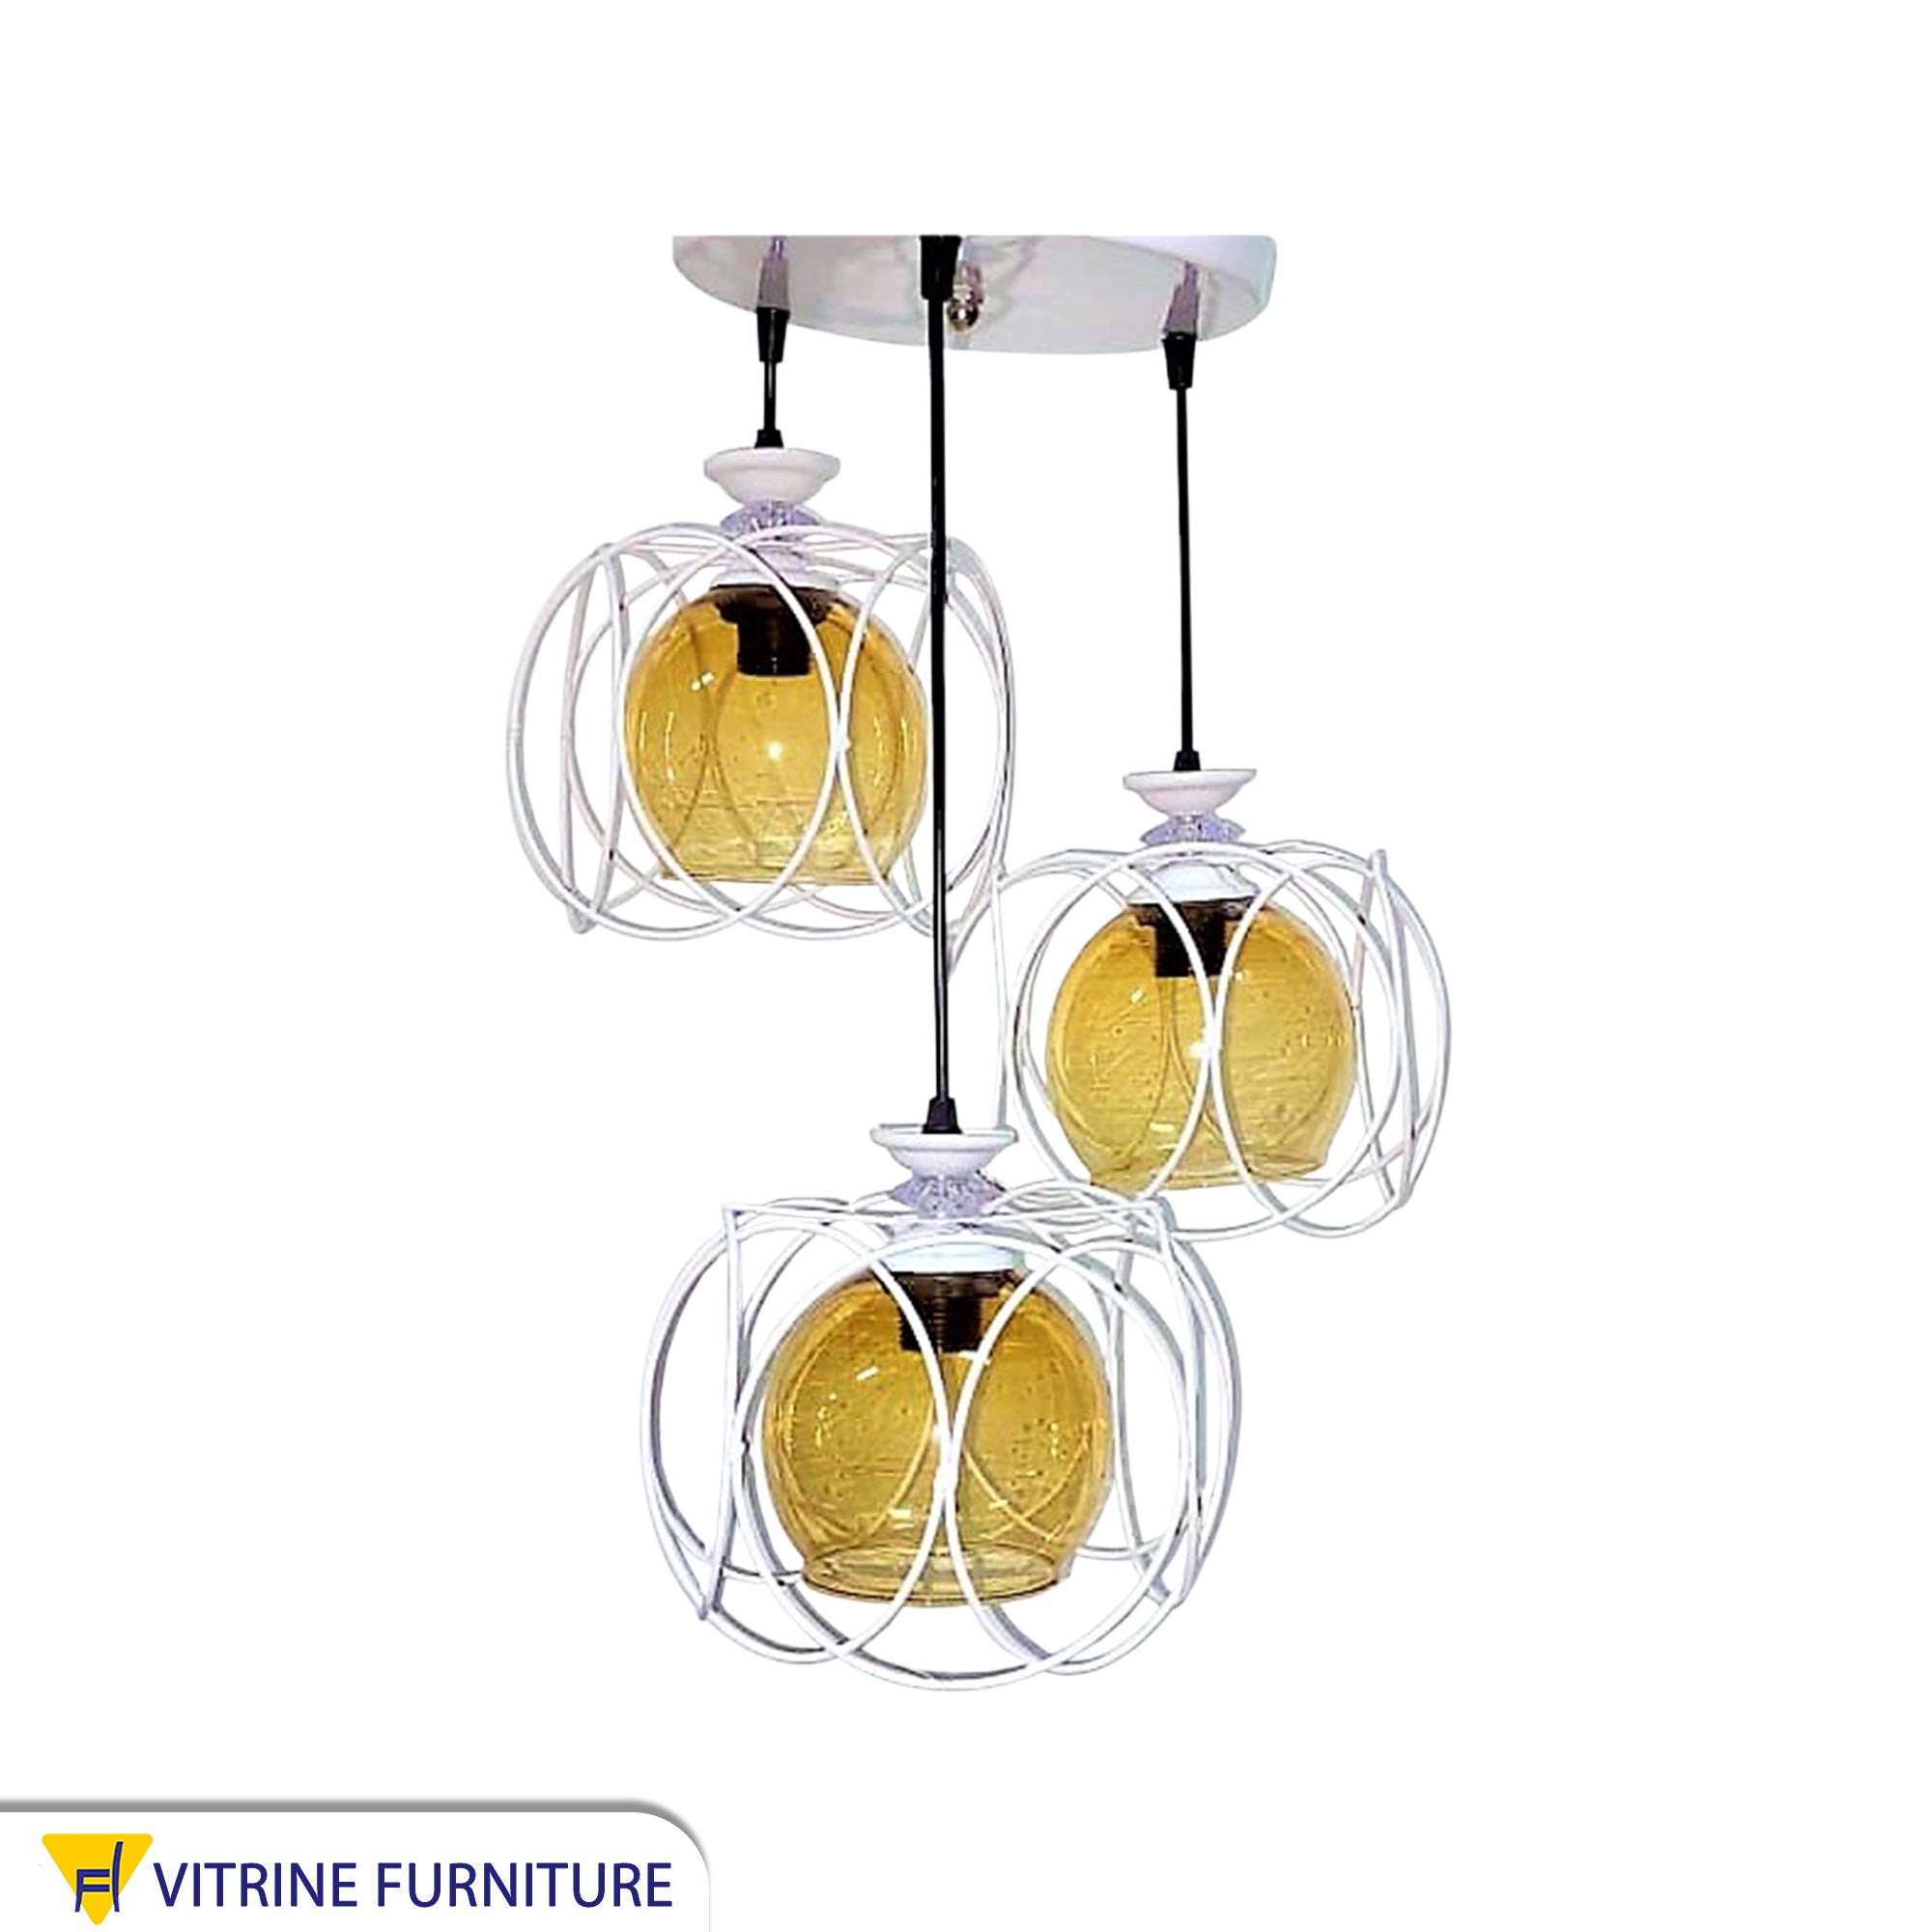 Three Pendant ceiling lamps, white metal and glass